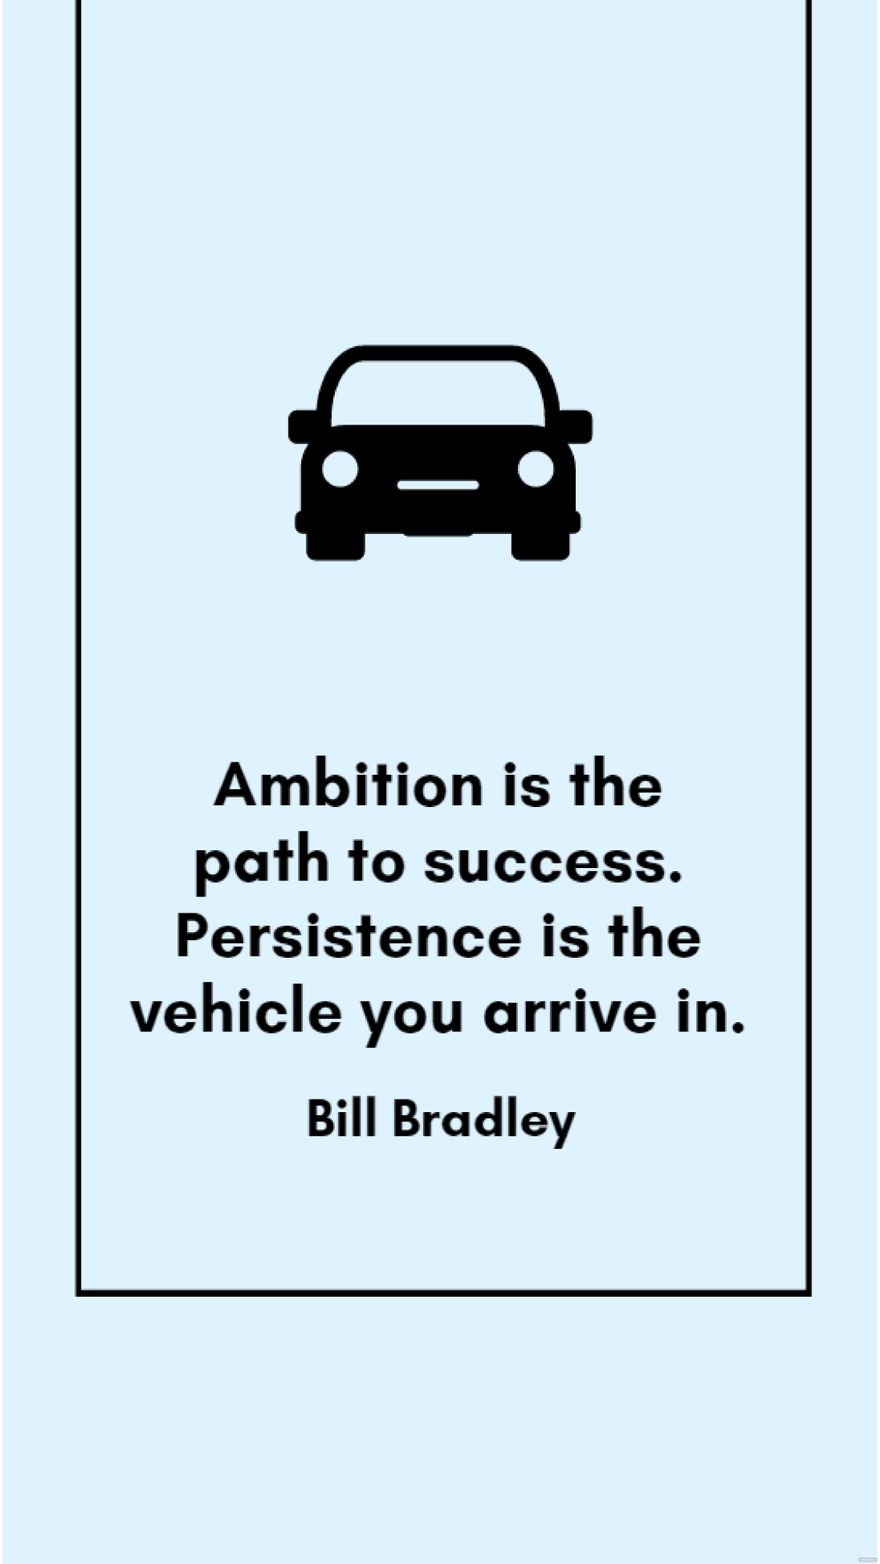 Bill Bradley - Ambition is the path to success. Persistence is the vehicle you arrive in.